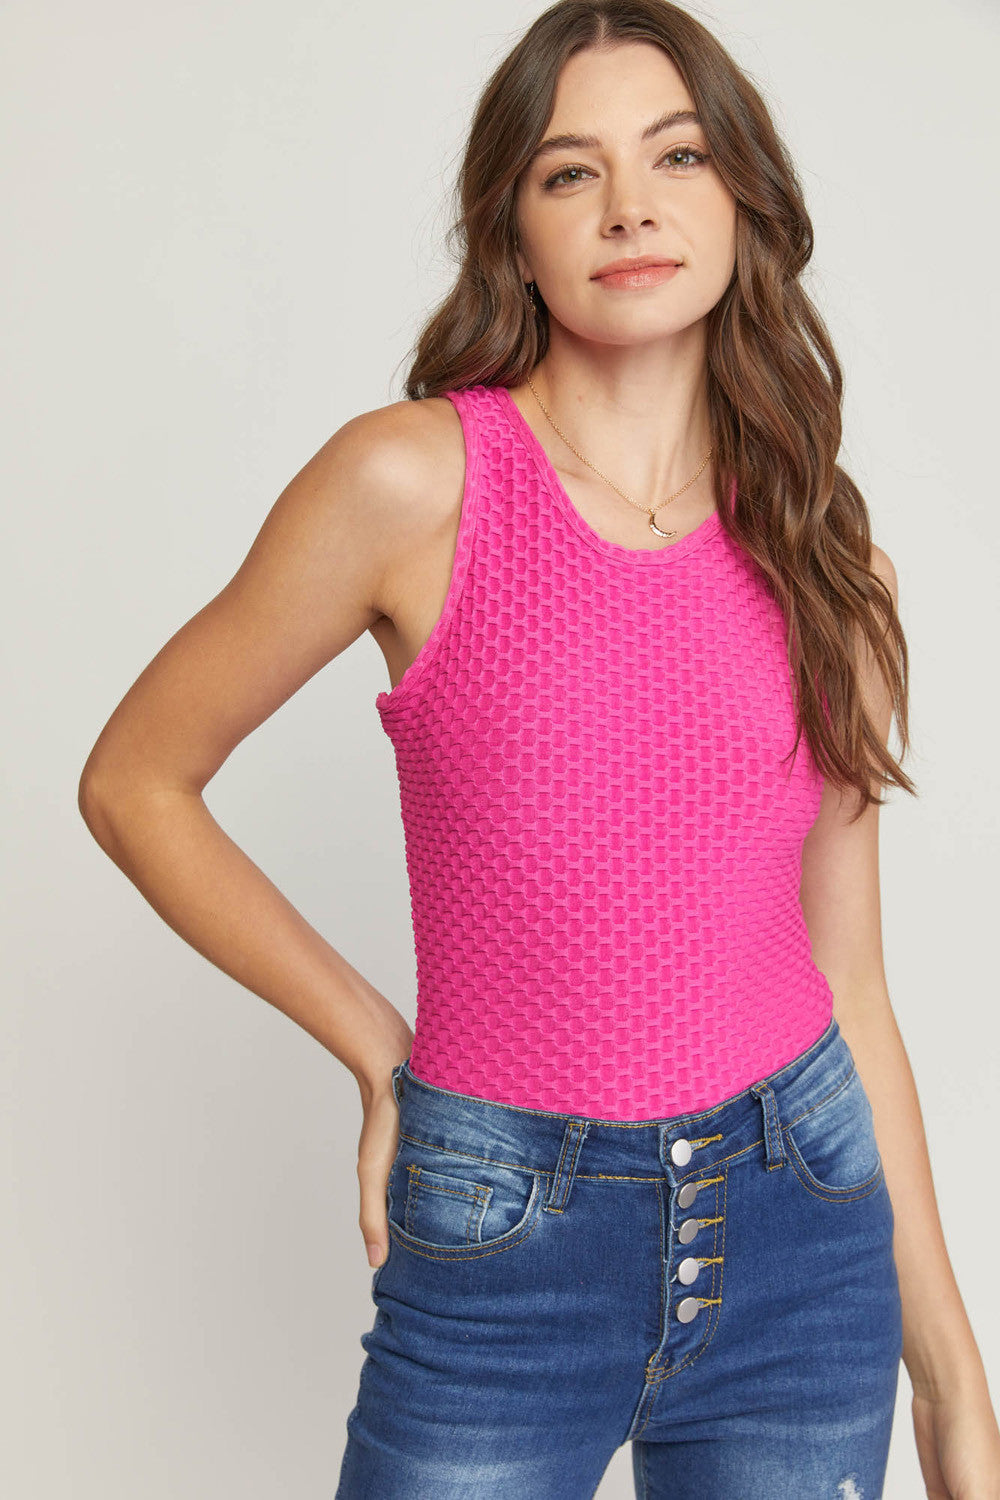 Go For It Textured Tank in Hot Pink